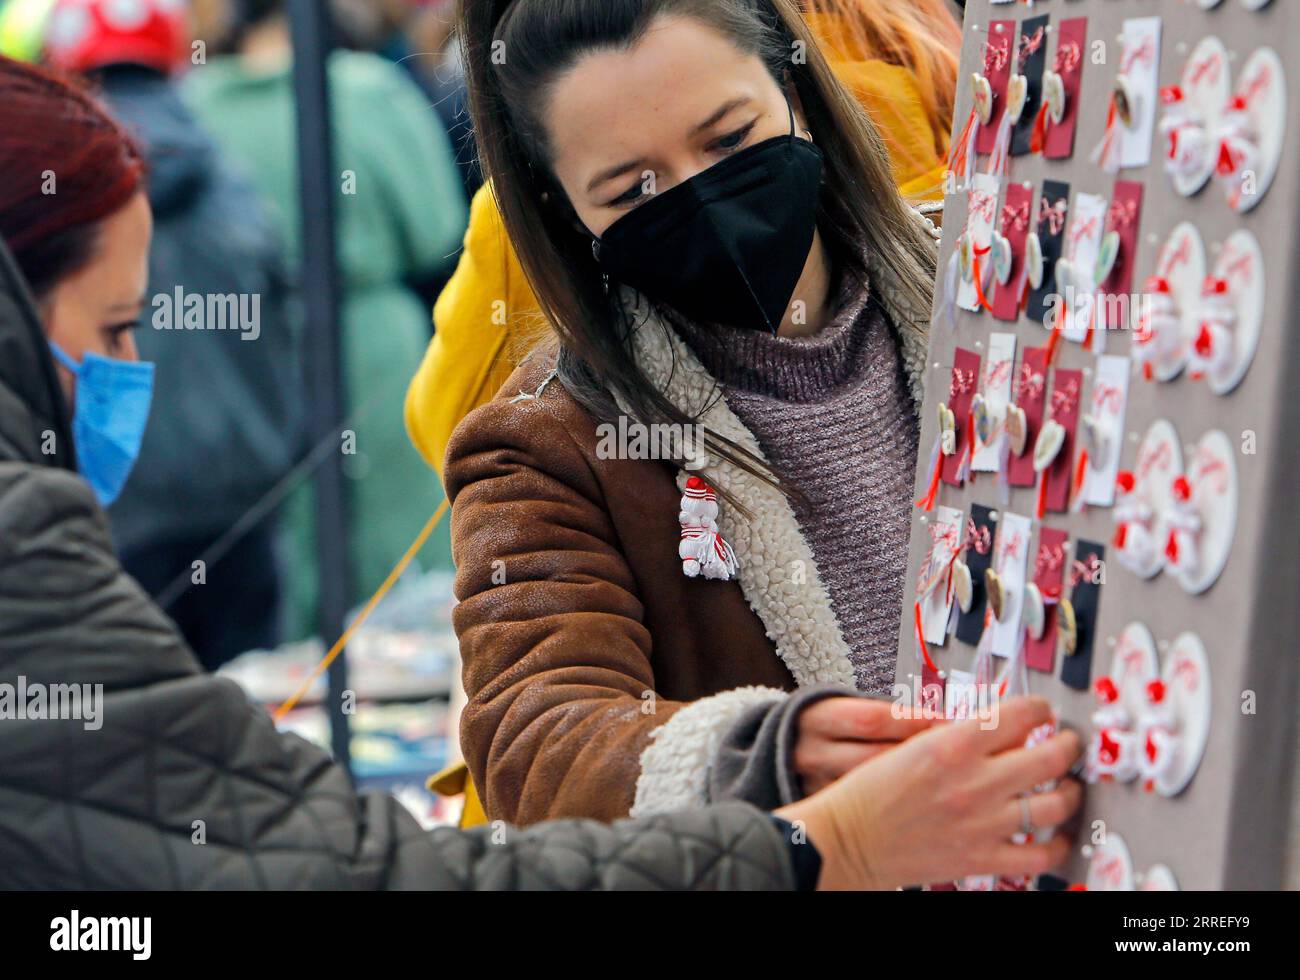 220227 -- BUCHAREST, Feb. 27, 2022 -- People look at small handmade figurines called Martisor during the Martisor Fair in Bucharest, capital of Romania, Feb. 26, 2022. Martisor is a small decoration tied with a red-and-white twisted string, given to women on the 1st of March as a token of appreciation, love or friendship and as a wish of health, being at the same time a symbol of the coming spring. Photo by /Xinhua ROMANIA-BUCHAREST-SPRING FAIR CristianxCristel PUBLICATIONxNOTxINxCHN Stock Photo